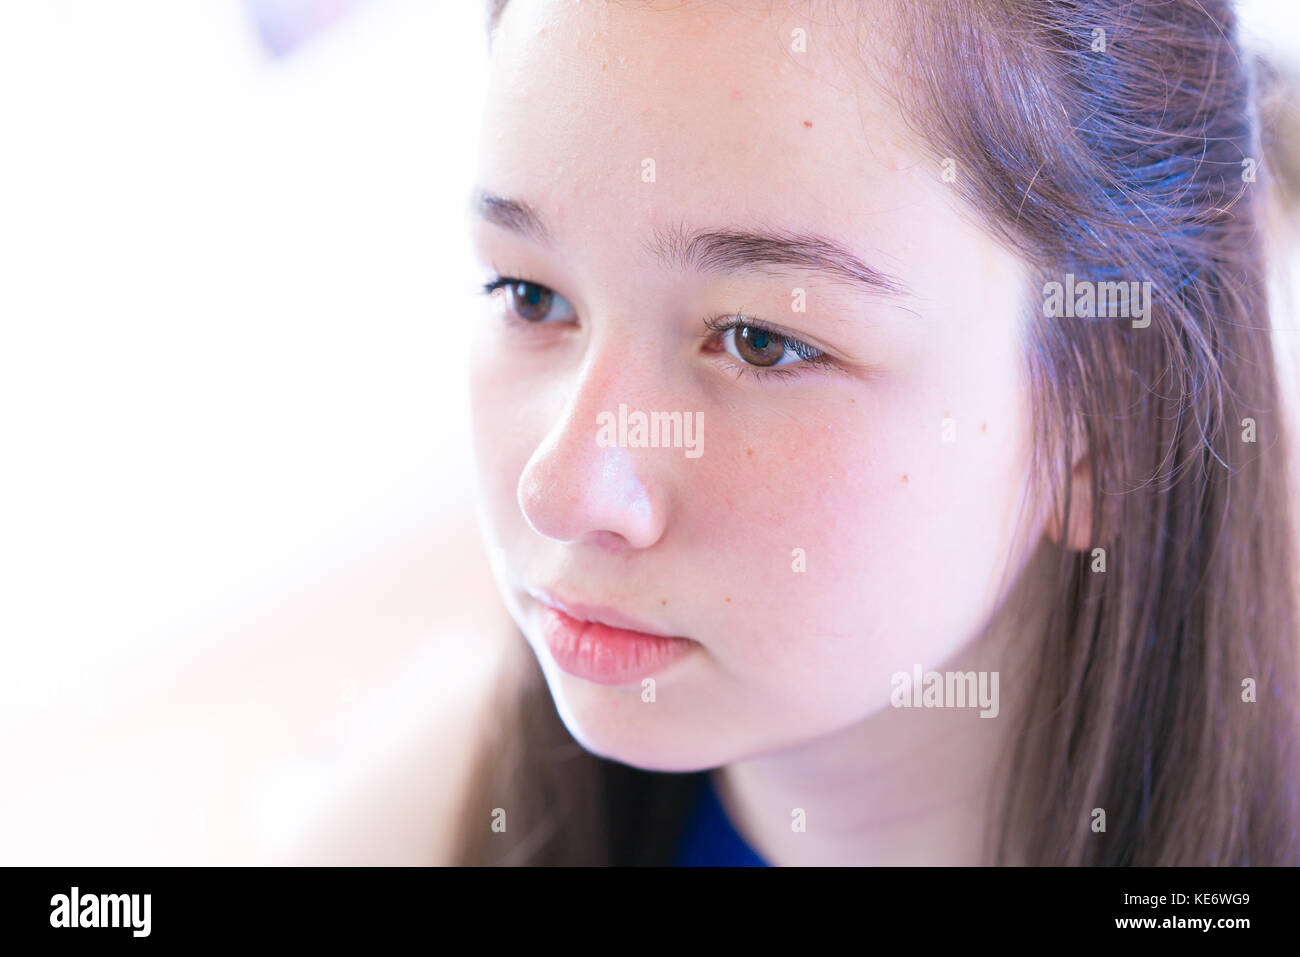 Portrait of teenage girl with long hair Stock Photo